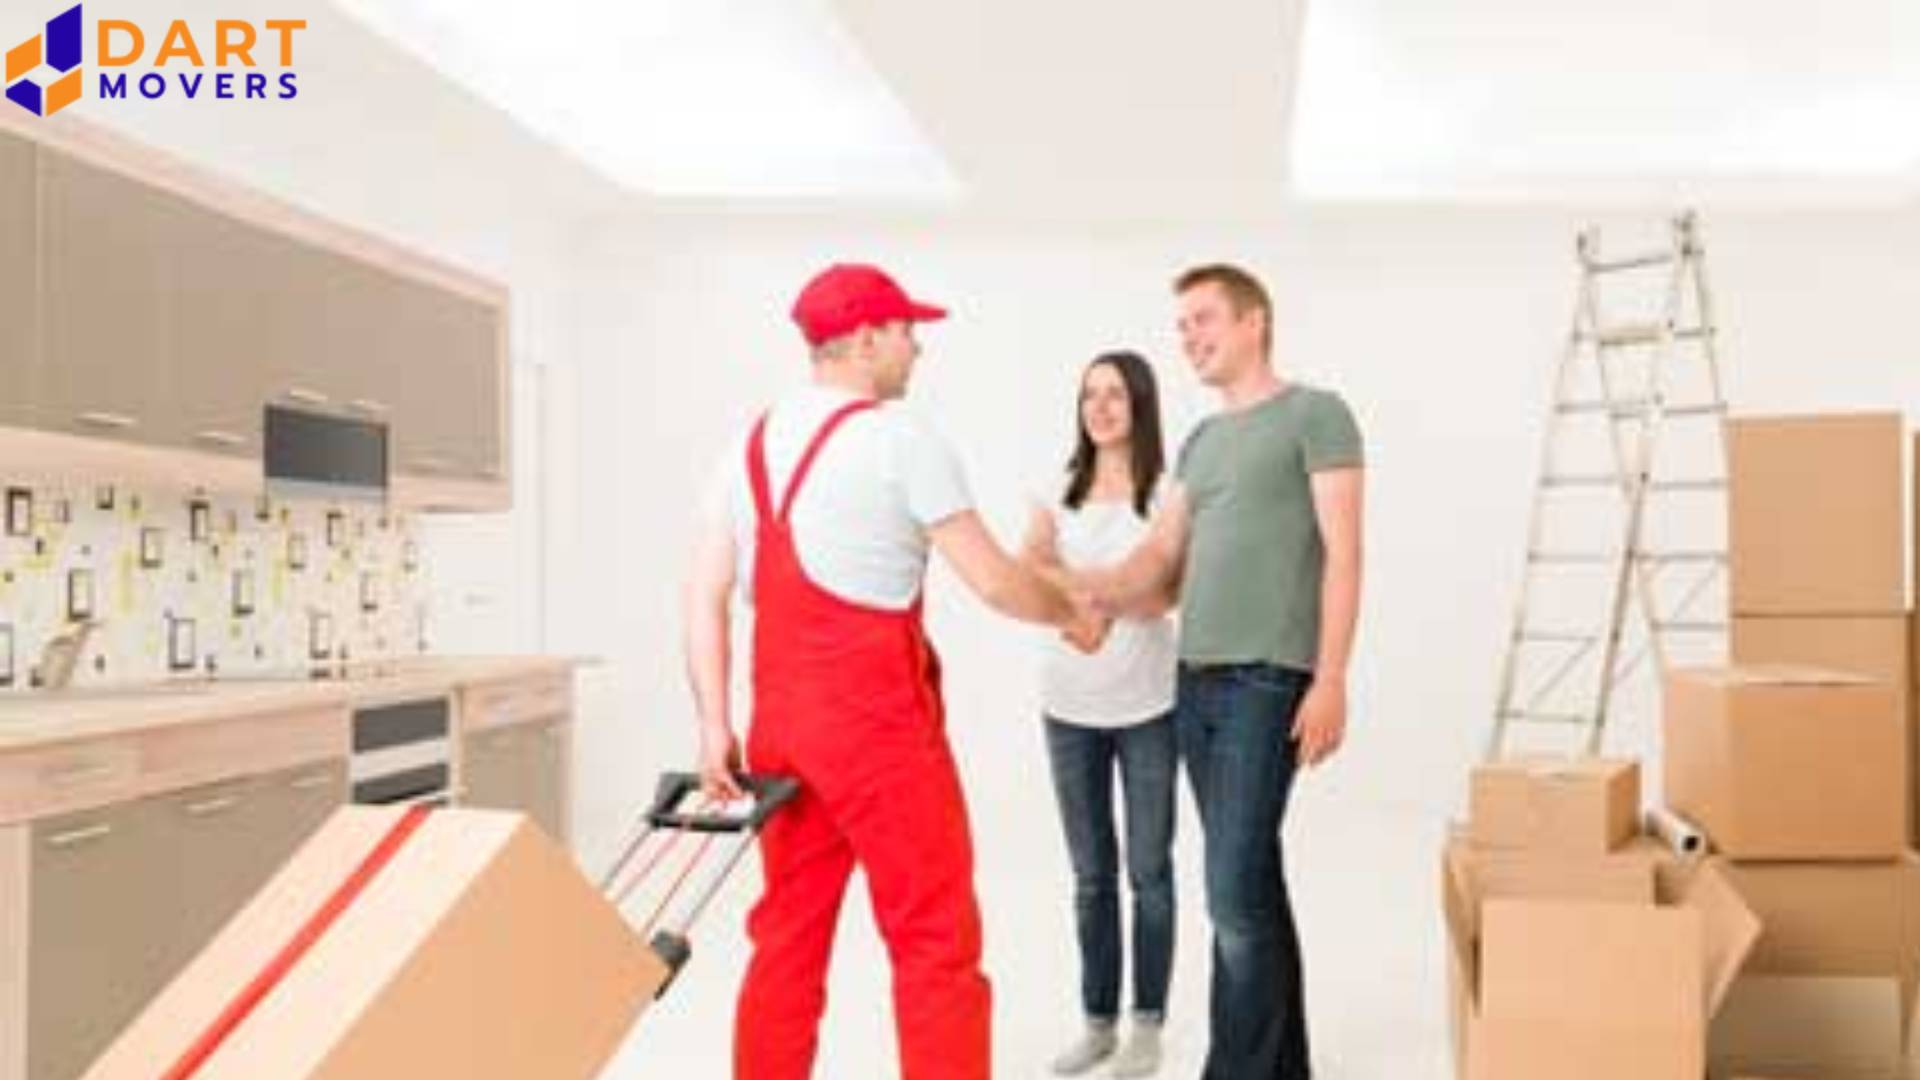 Choose among our list of best house movers in Dubai